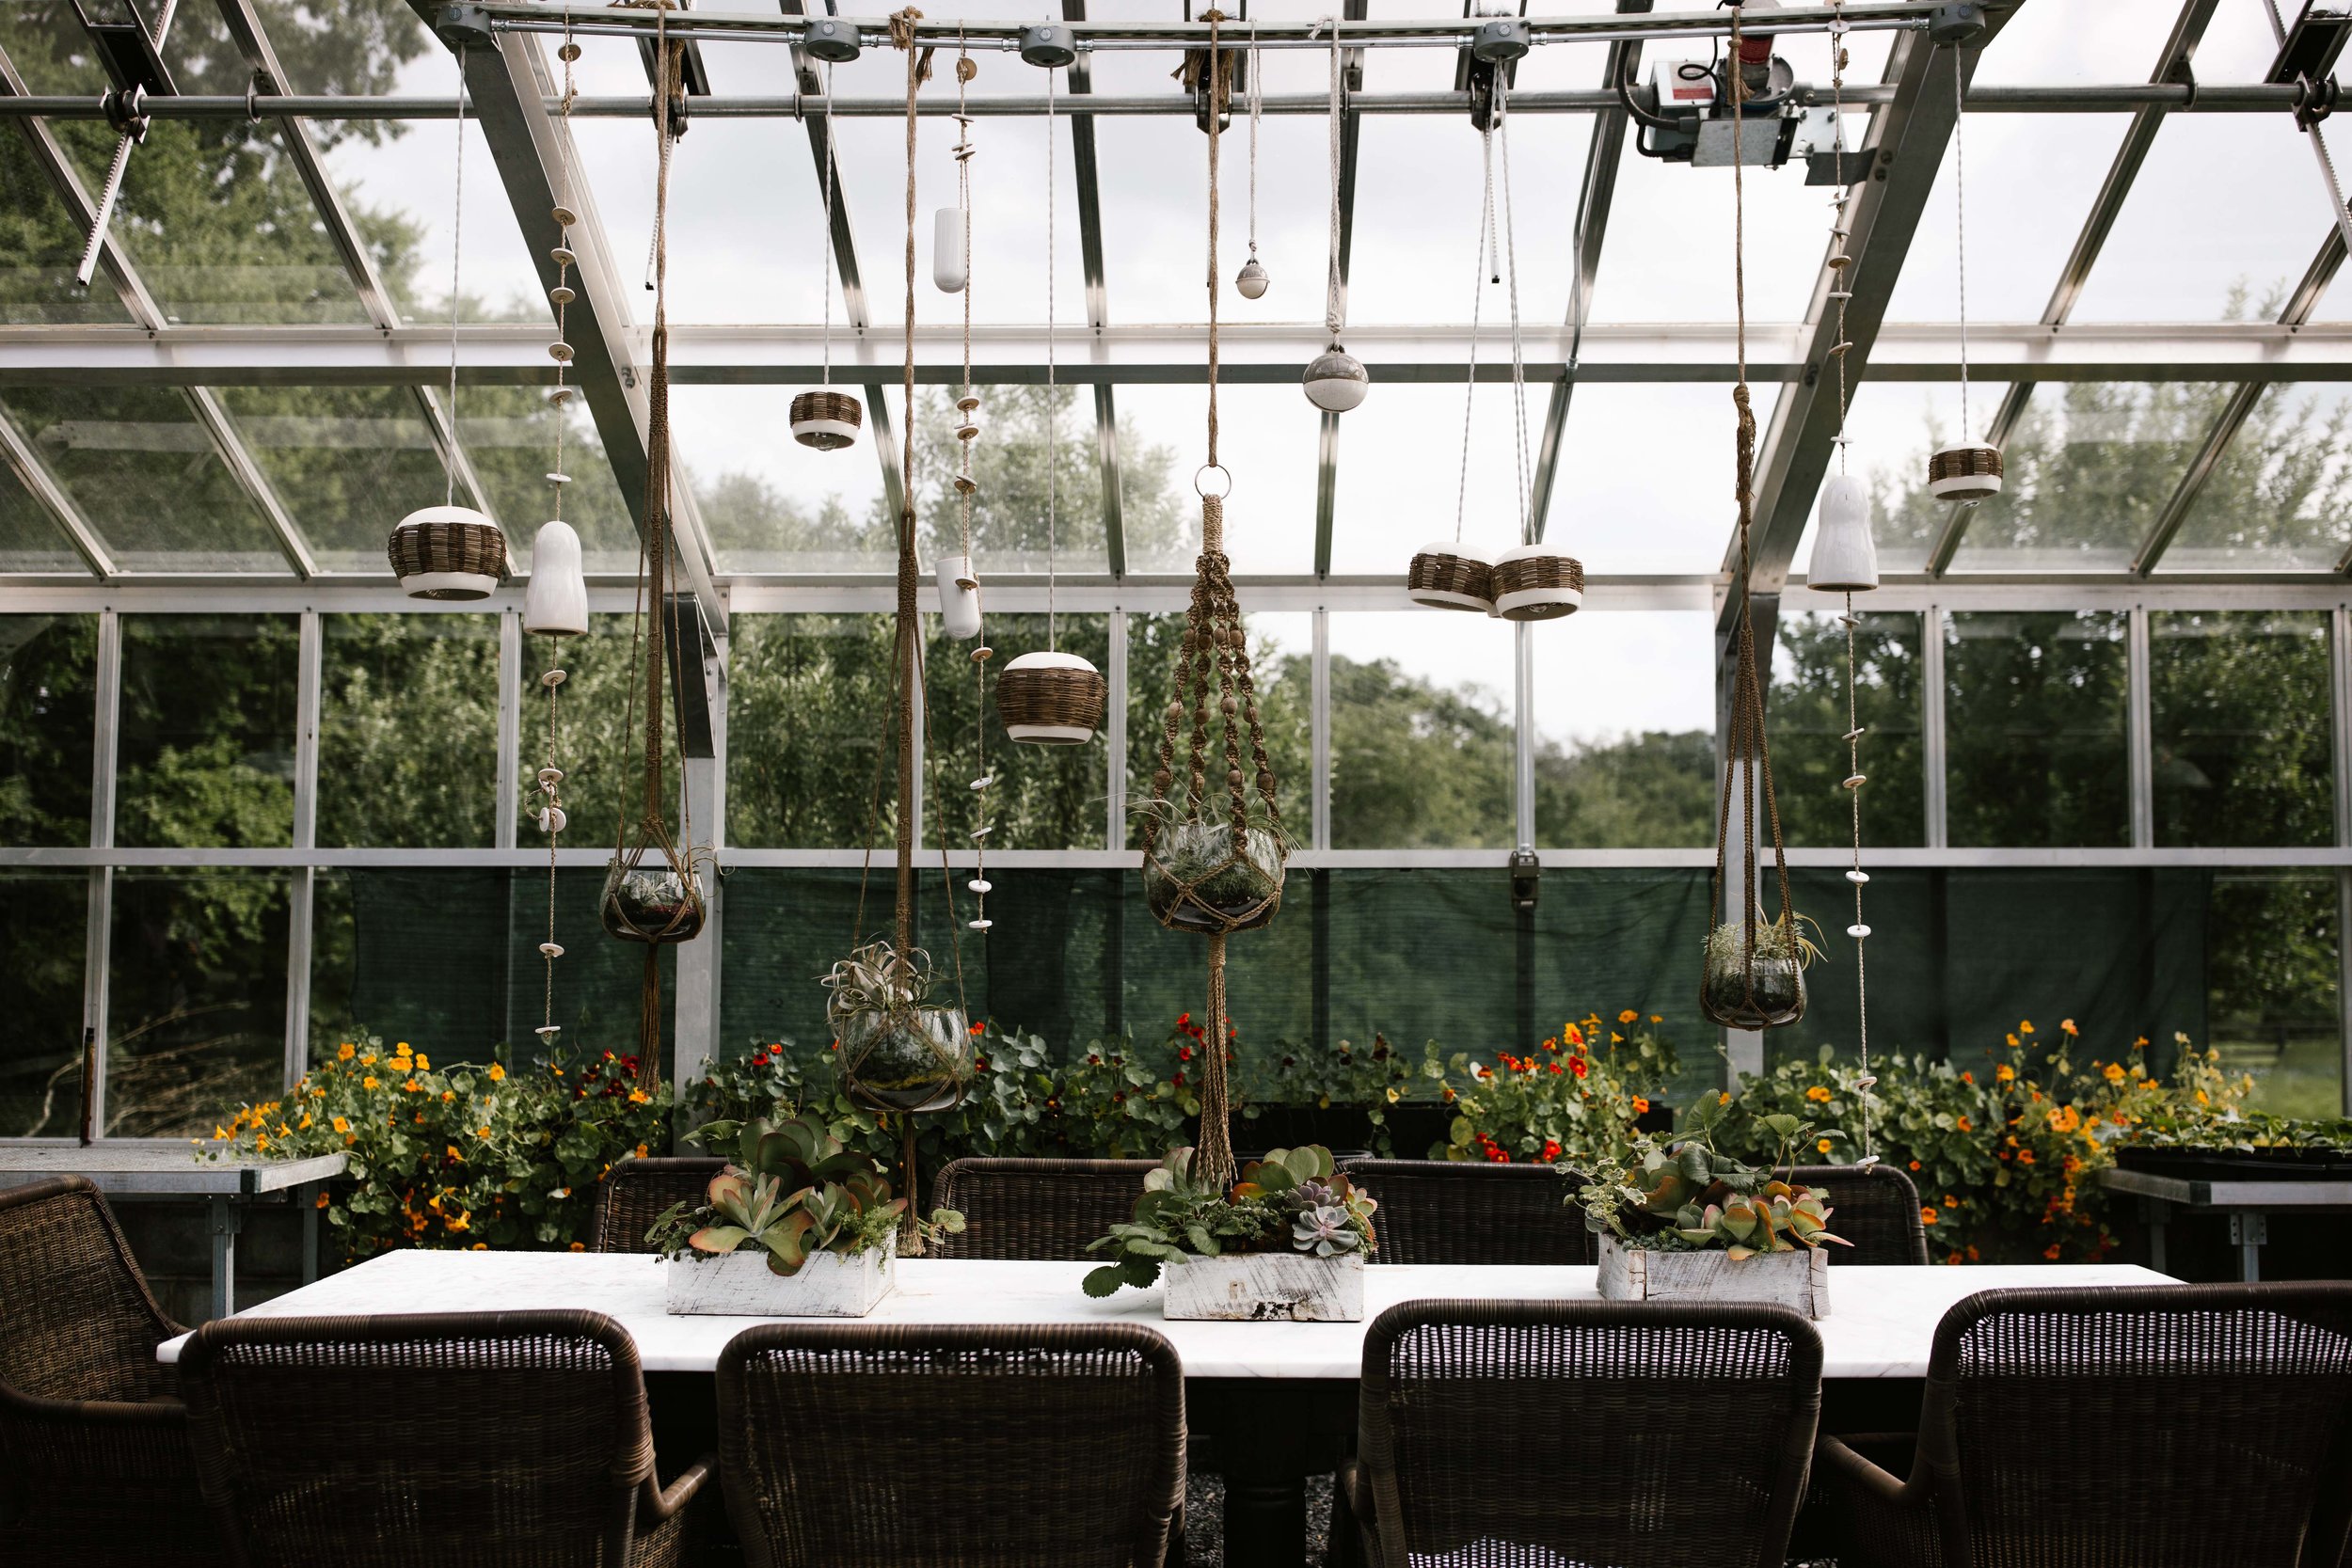 Greenhouse seating for eight